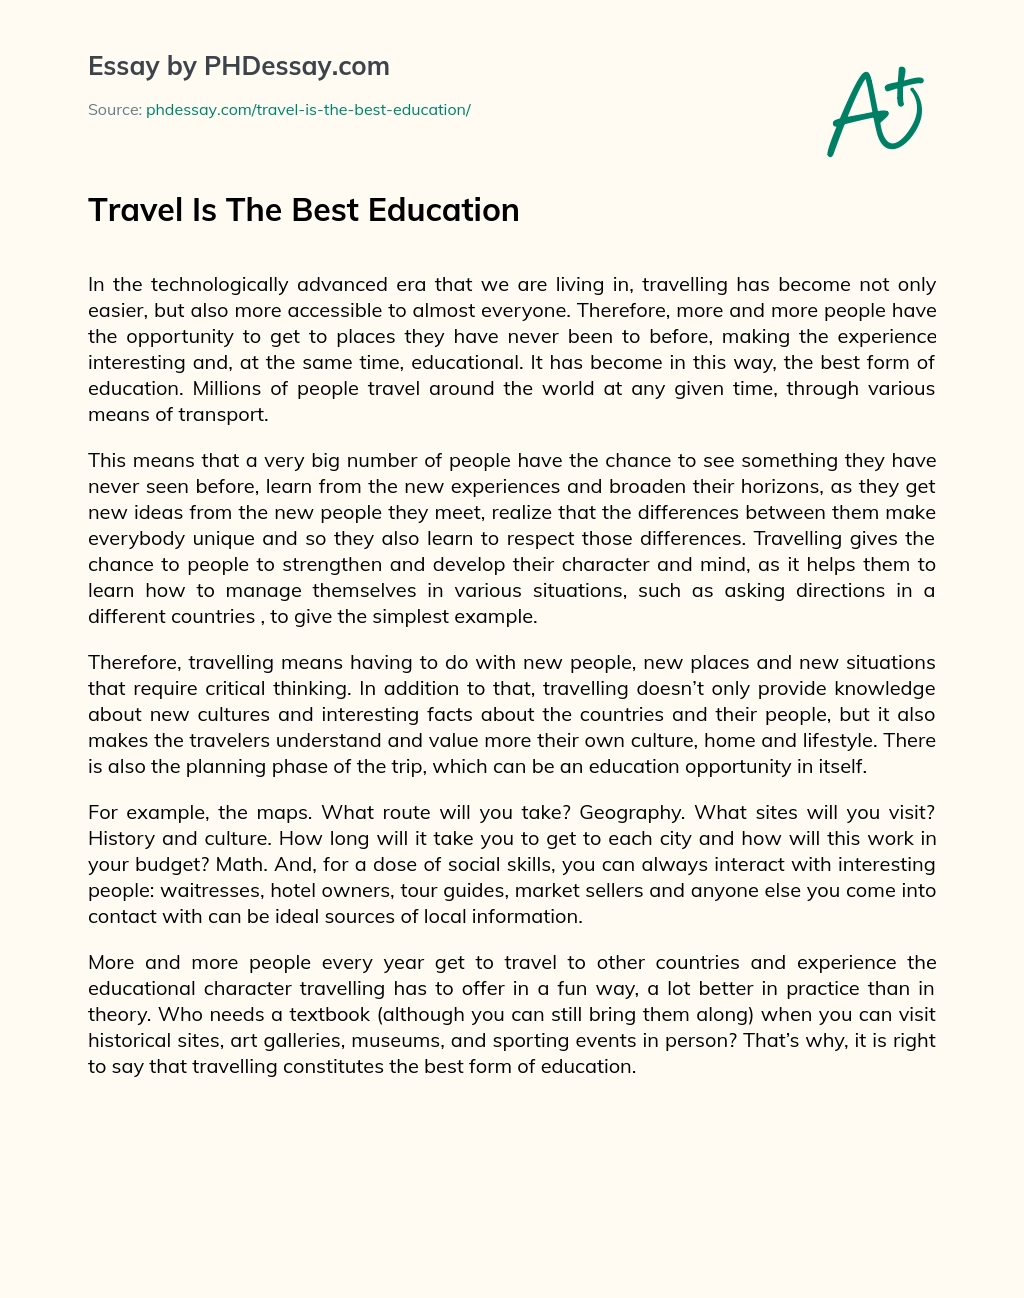 Travel Is The Best Education essay